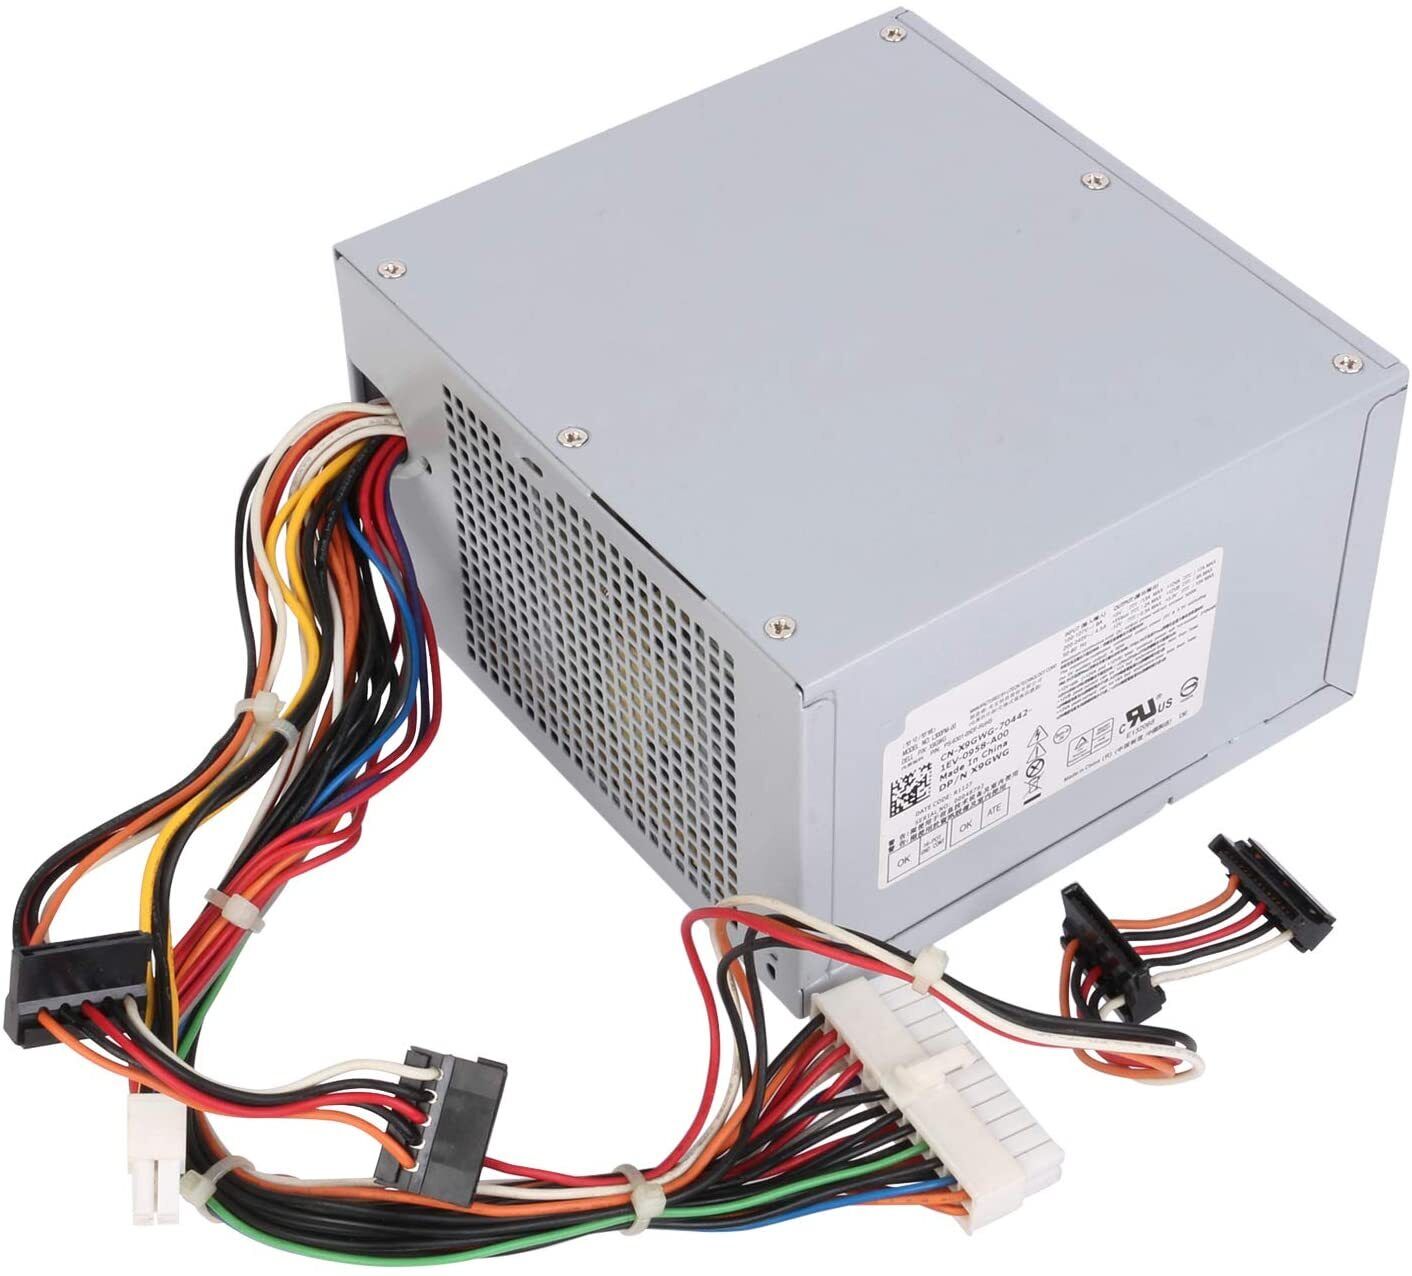 300W Power Supply Fors Dell Inspiron 3847 MT L300NM-01 PS-6301-06D G9MTY 0G9MTY